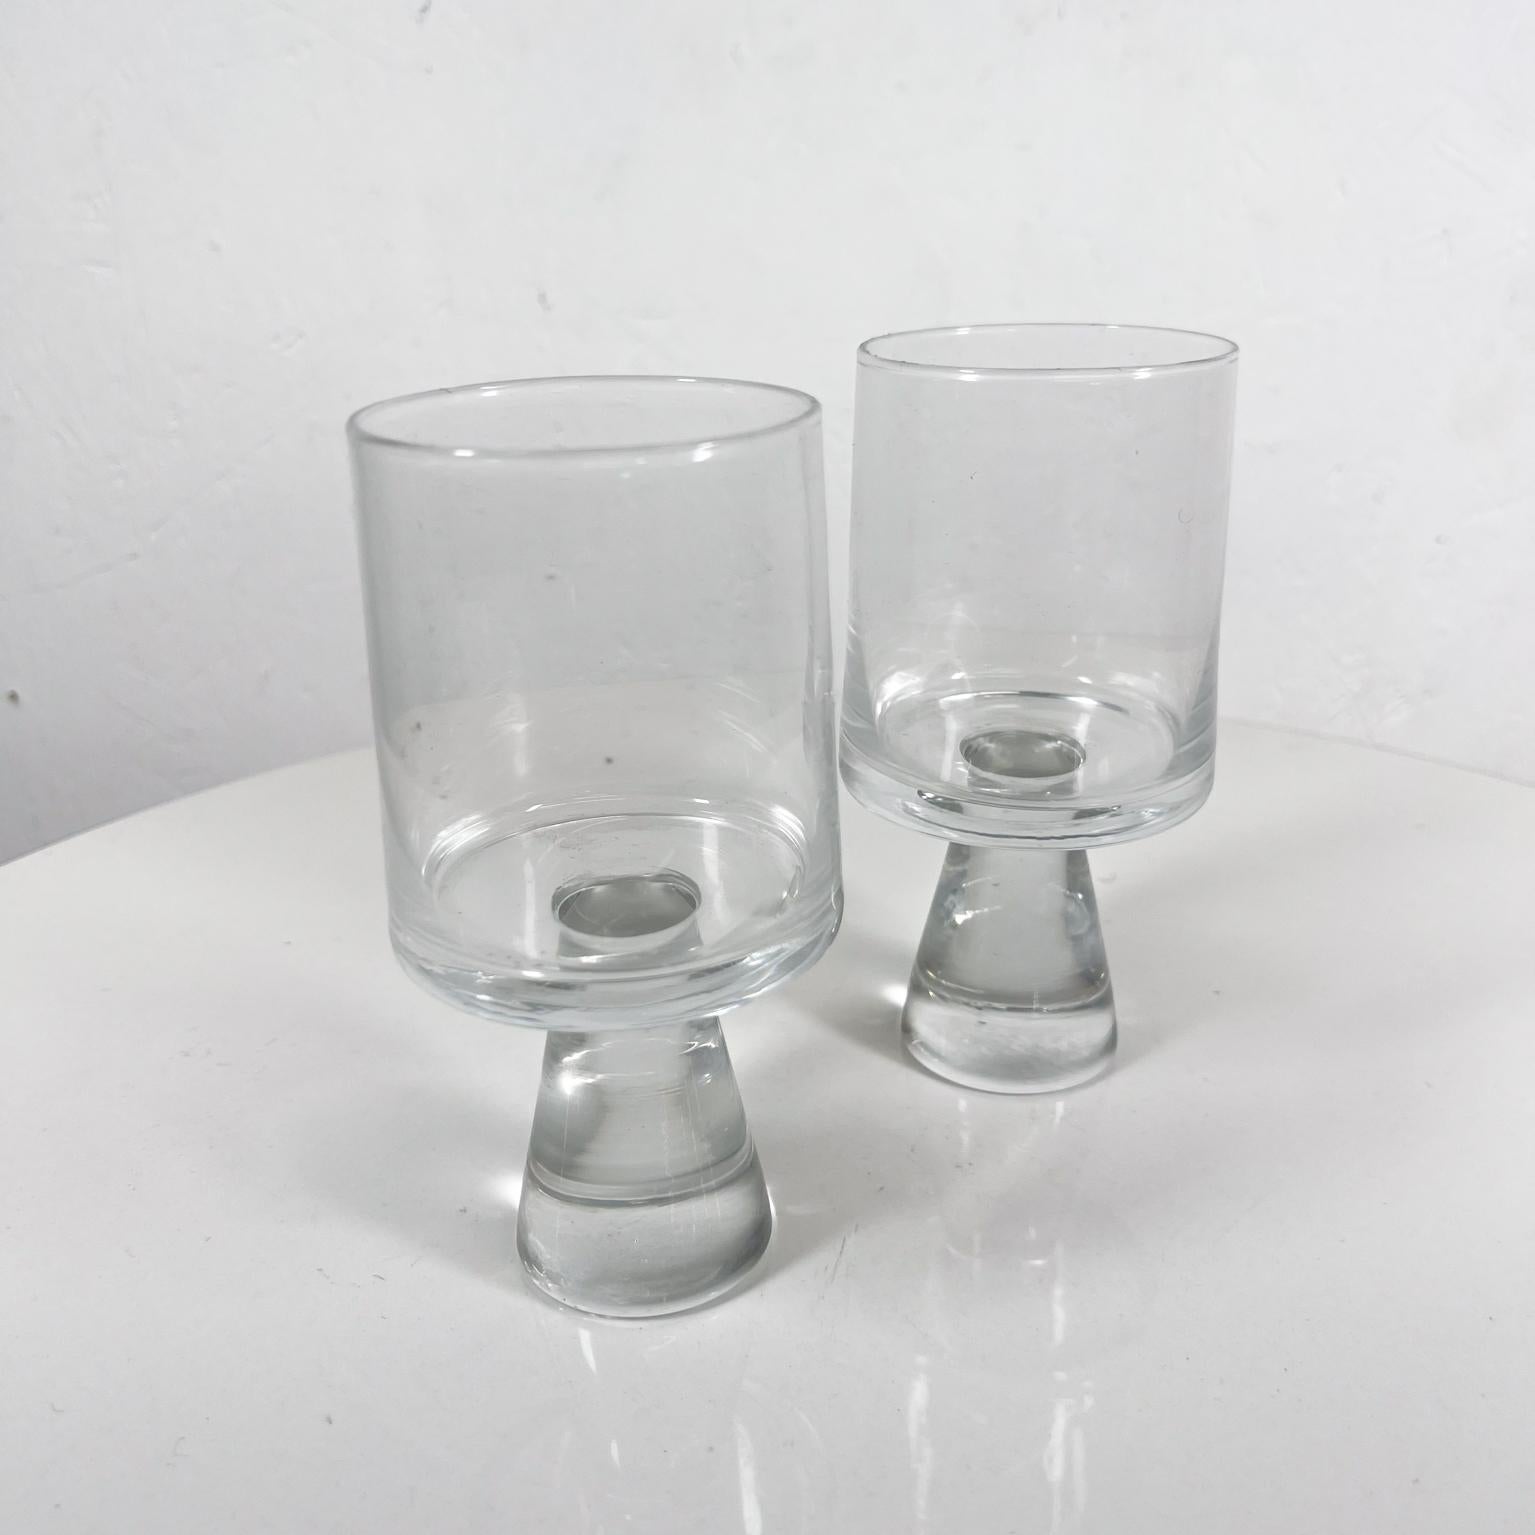 1970s Mod Set of Two Tumbler Water Goblet Crystal Glasses In Good Condition For Sale In Chula Vista, CA